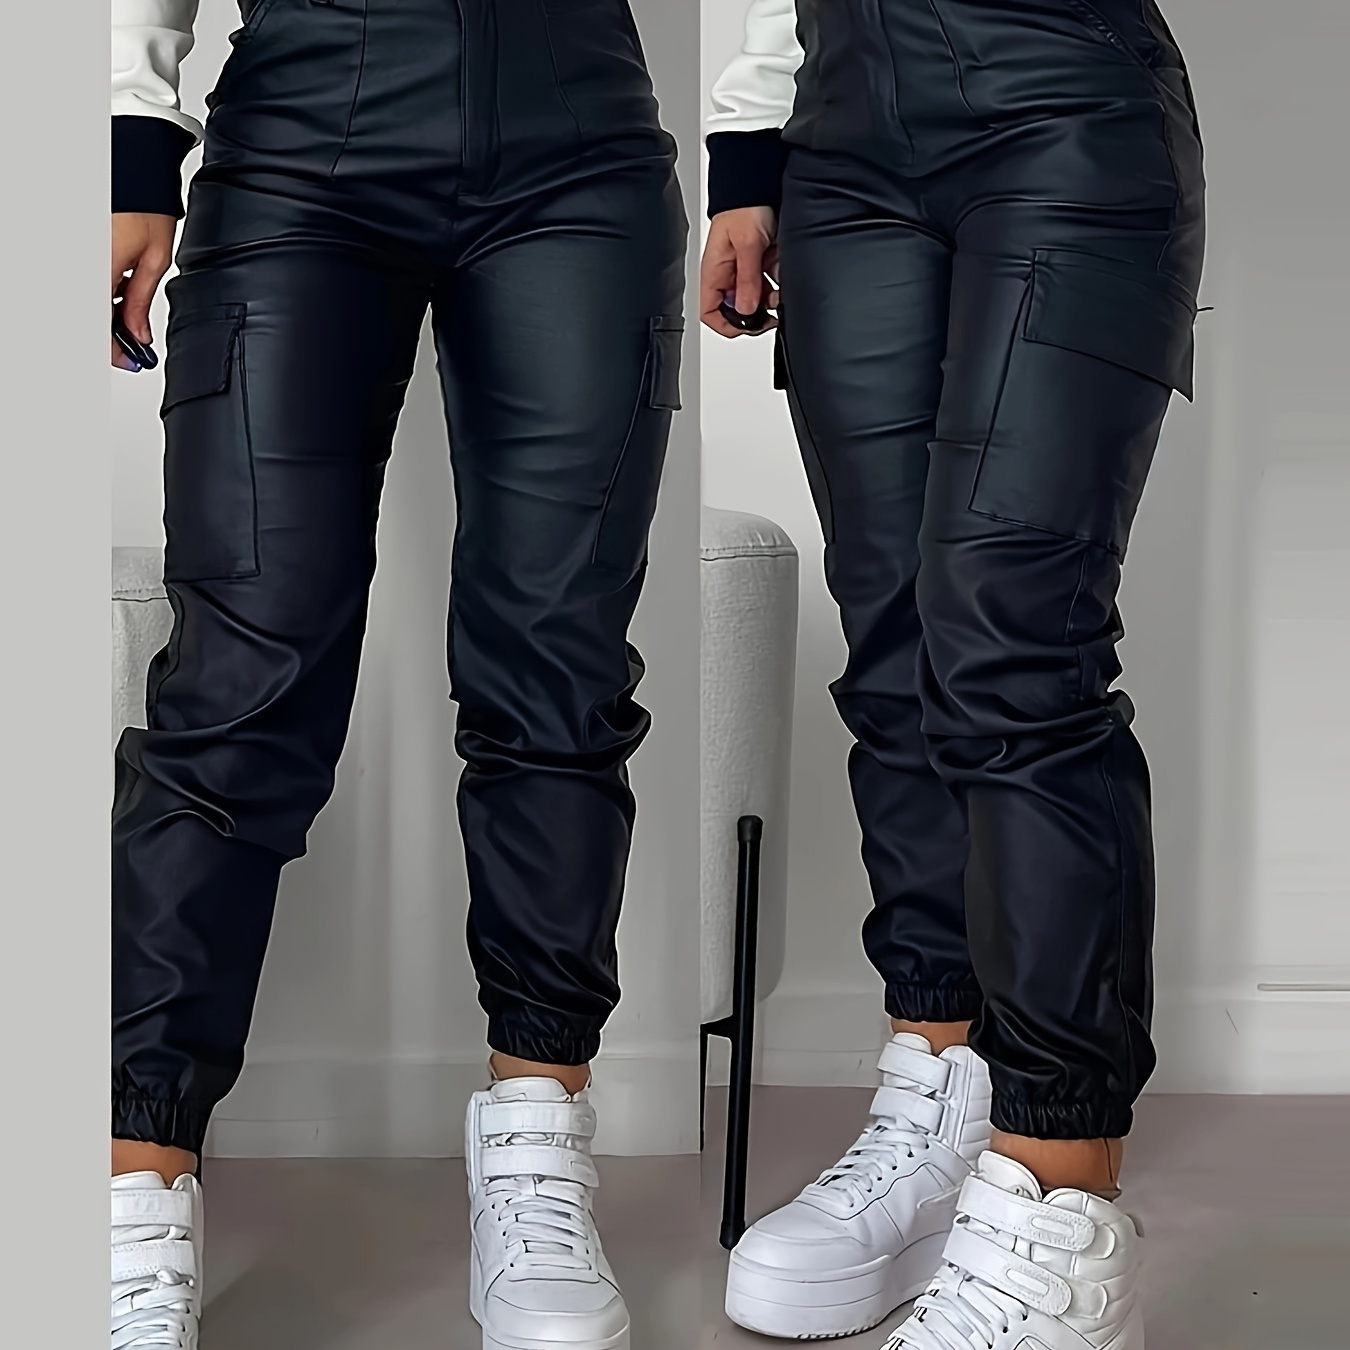 

Flap Pockets Jogger Cargo Pants, Stylish Faux Leather High Waist Pants For Spring & Summer, Women's Clothing